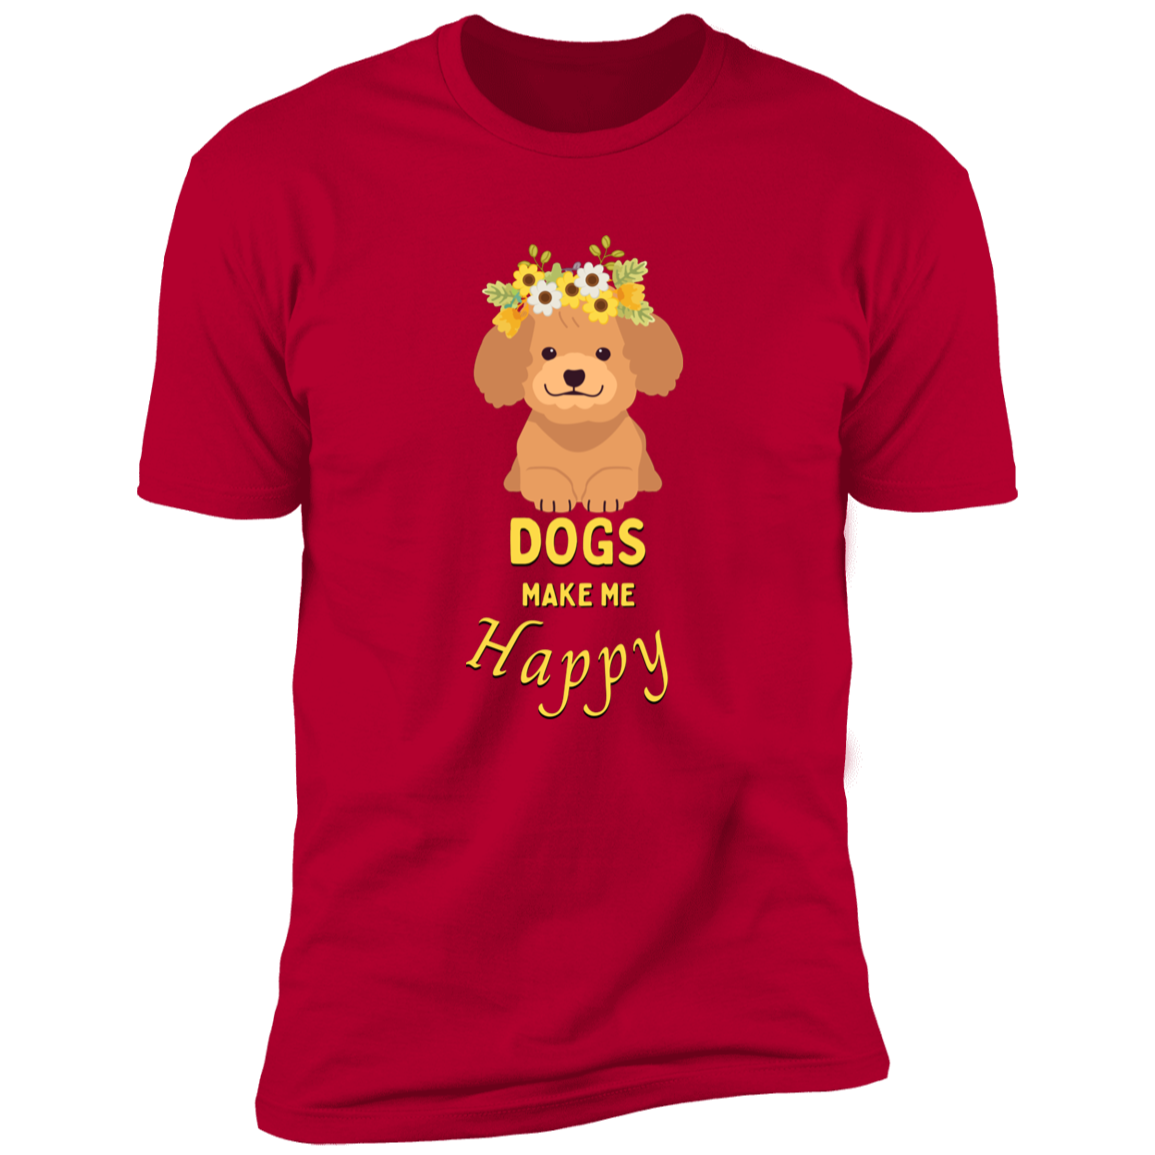 Dogs Make Me Happy t-shirt, funny dog shirt for humans, in red